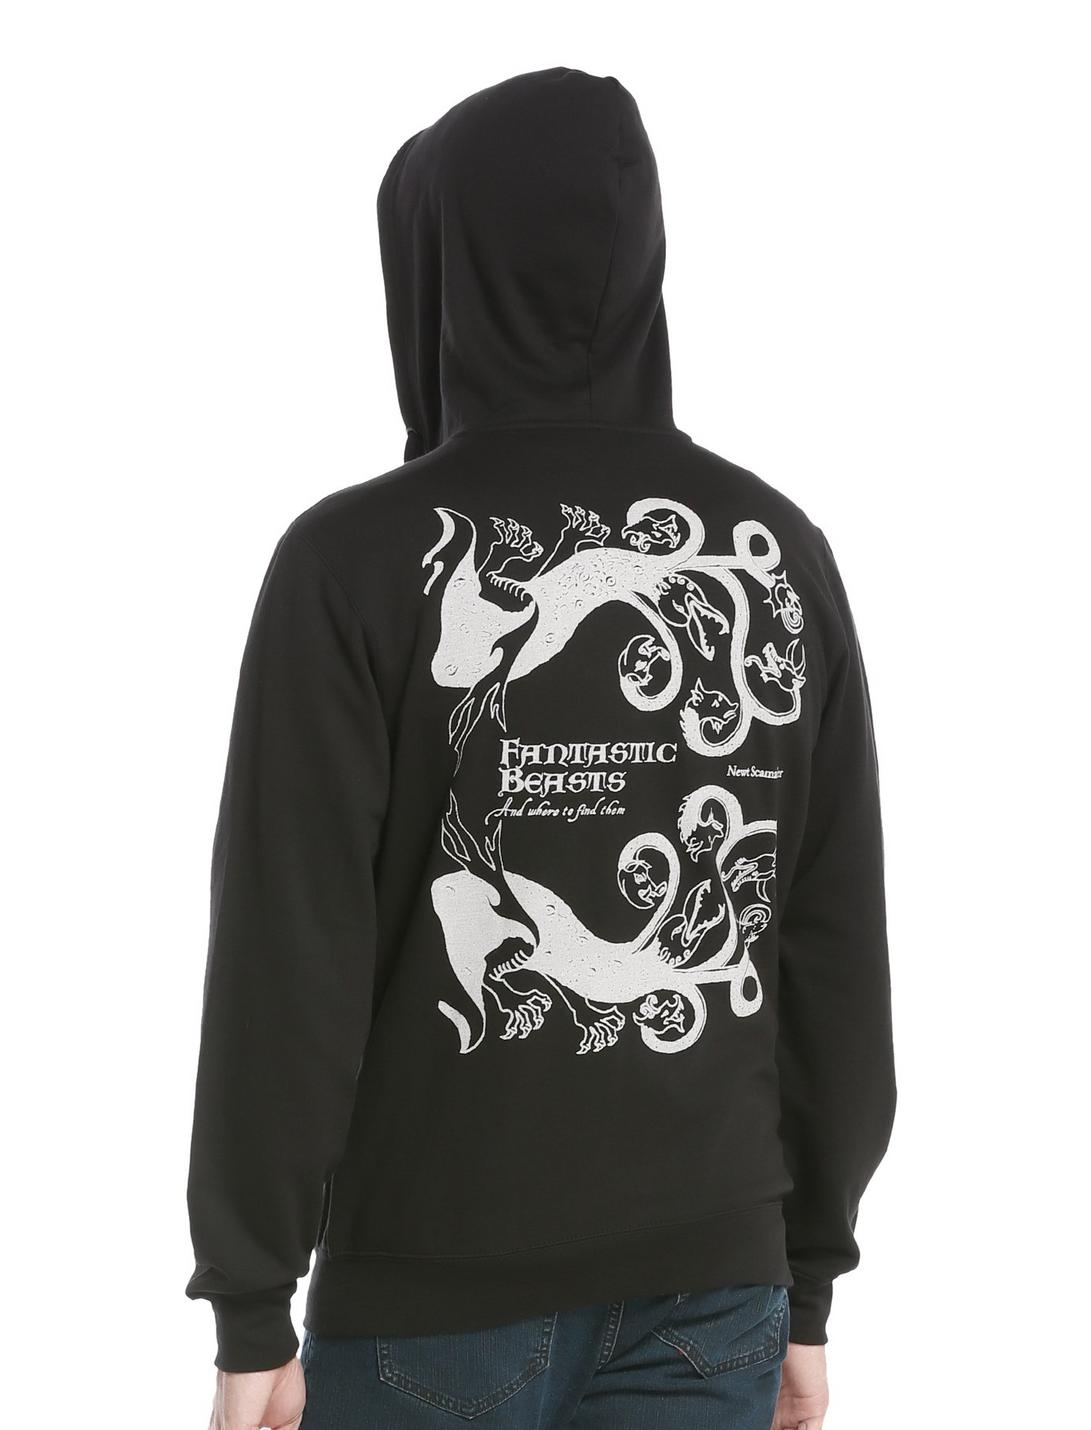 Harry Potter Fantastic Beasts And Where To Find Them Book Cover Hoodie, BLACK, hi-res